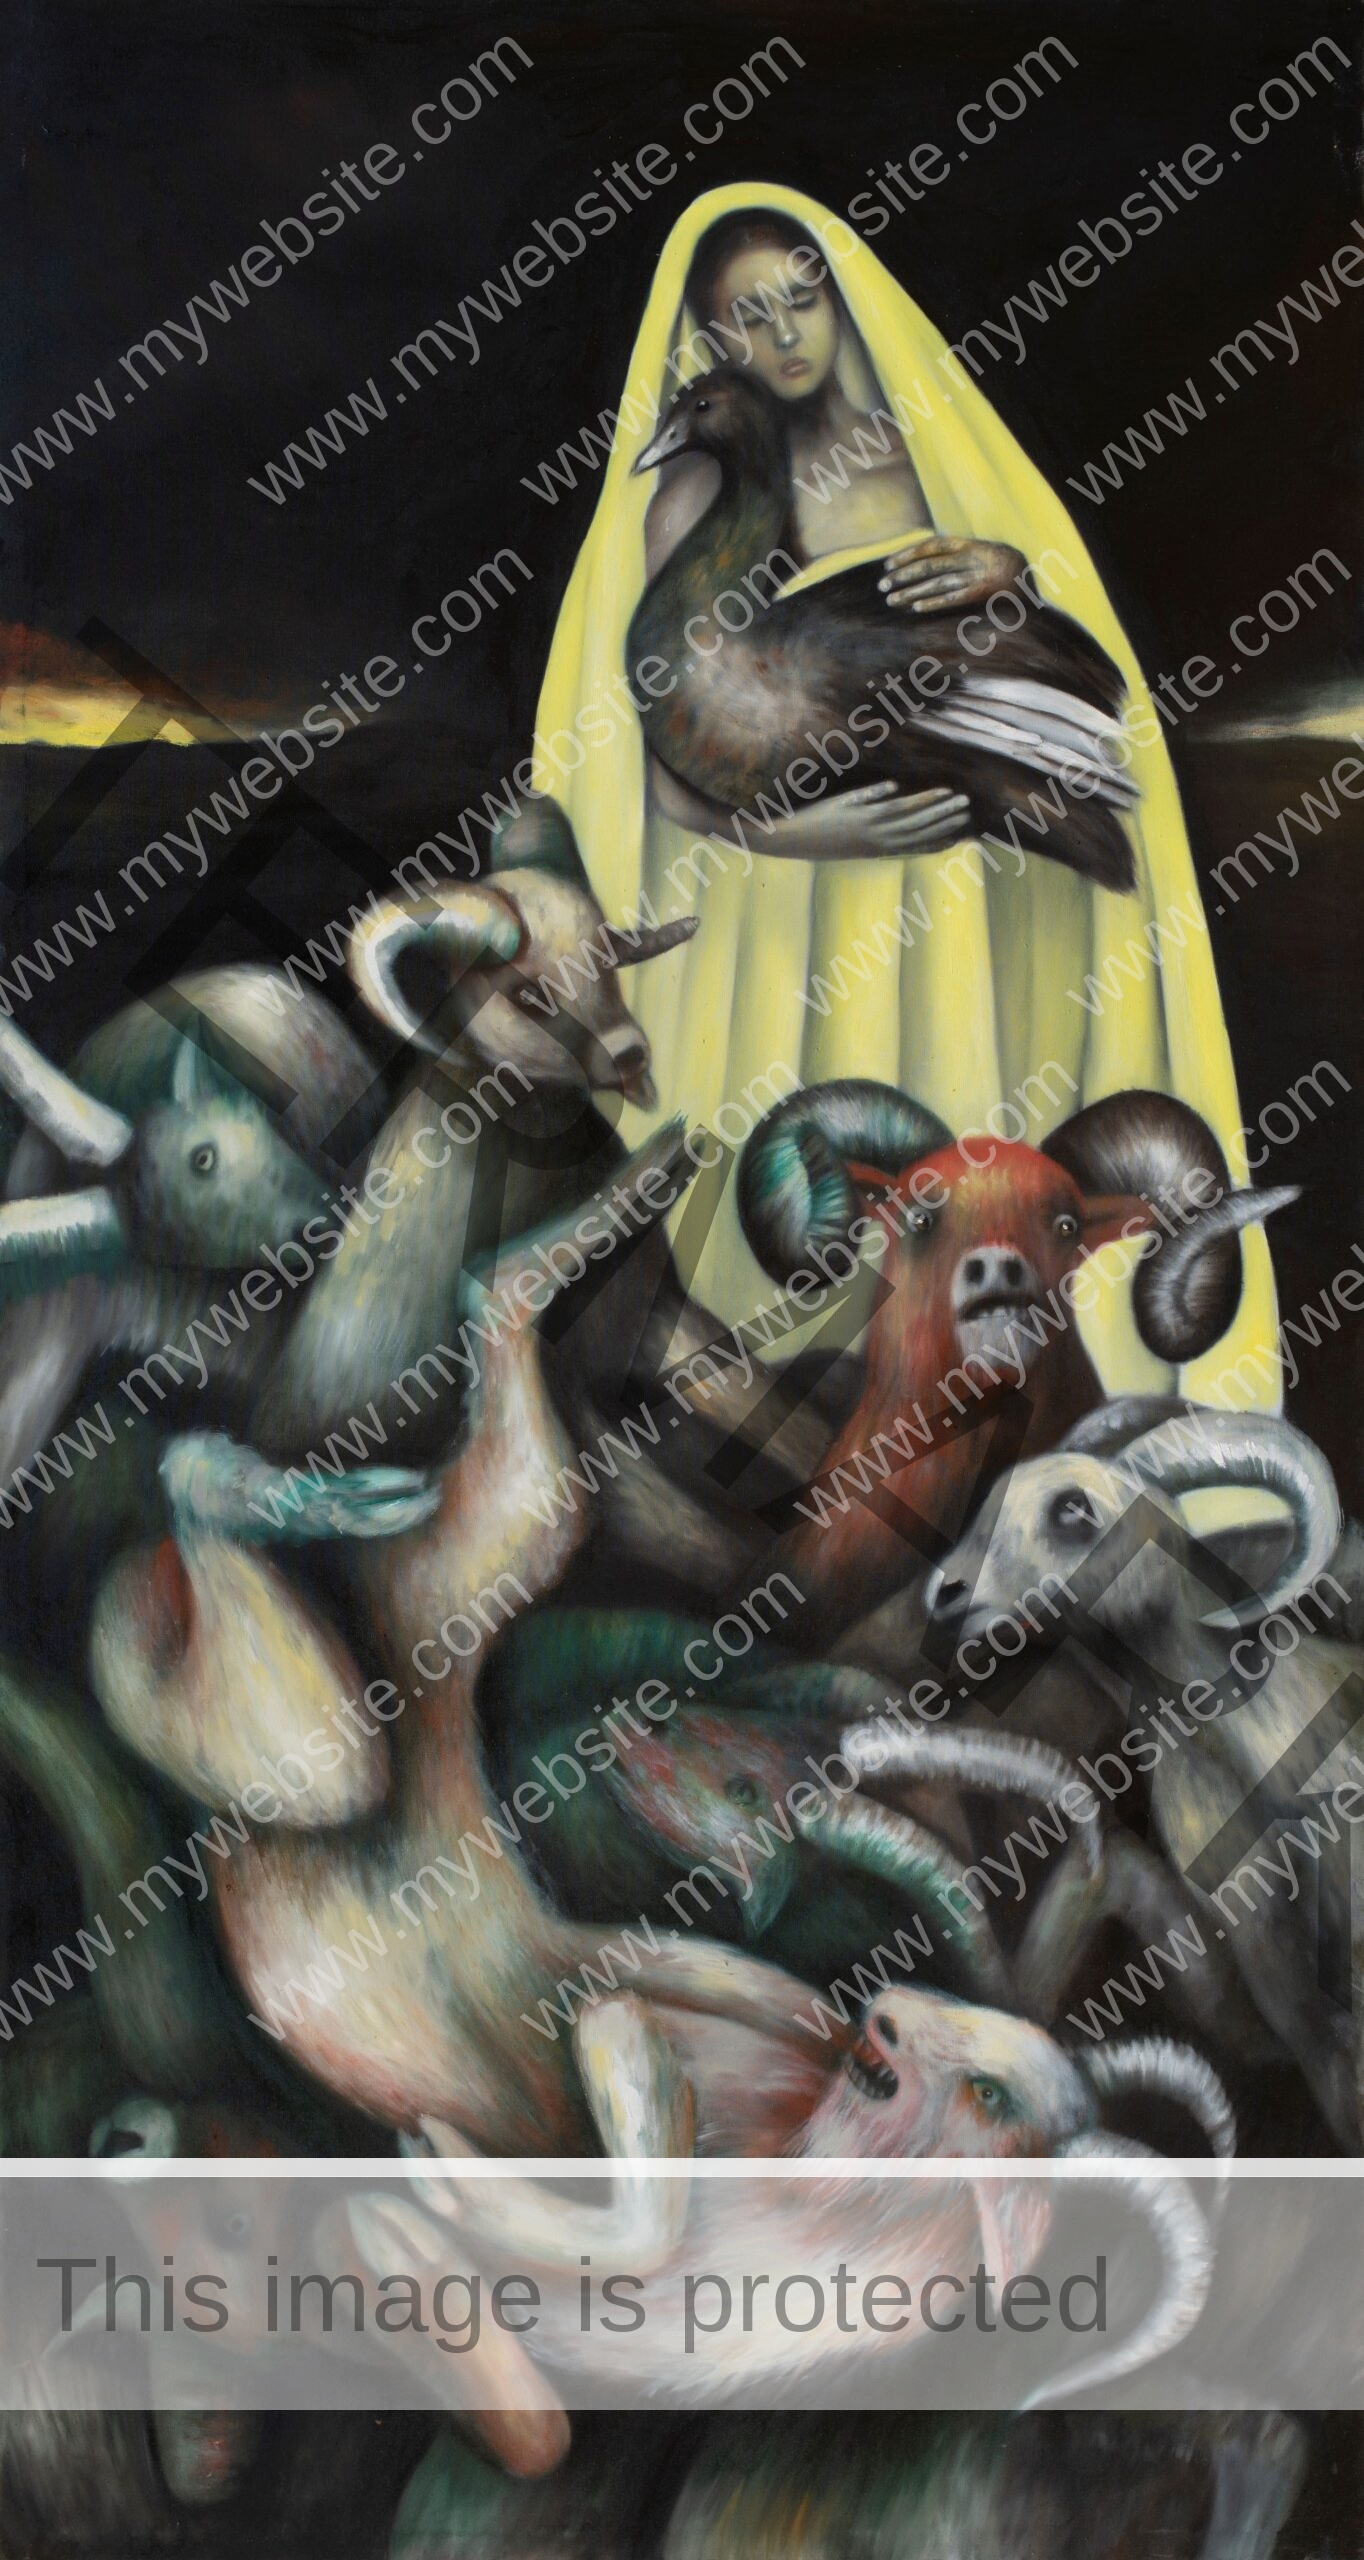 Maternidad painting by Pablo Mejias, featuring a chaotic scene with entangled animals in the foreground and a woman wearing a yellow cloak in the background. She holds a bird in her arms, creating an unsettling notion of maternity and nurturing.